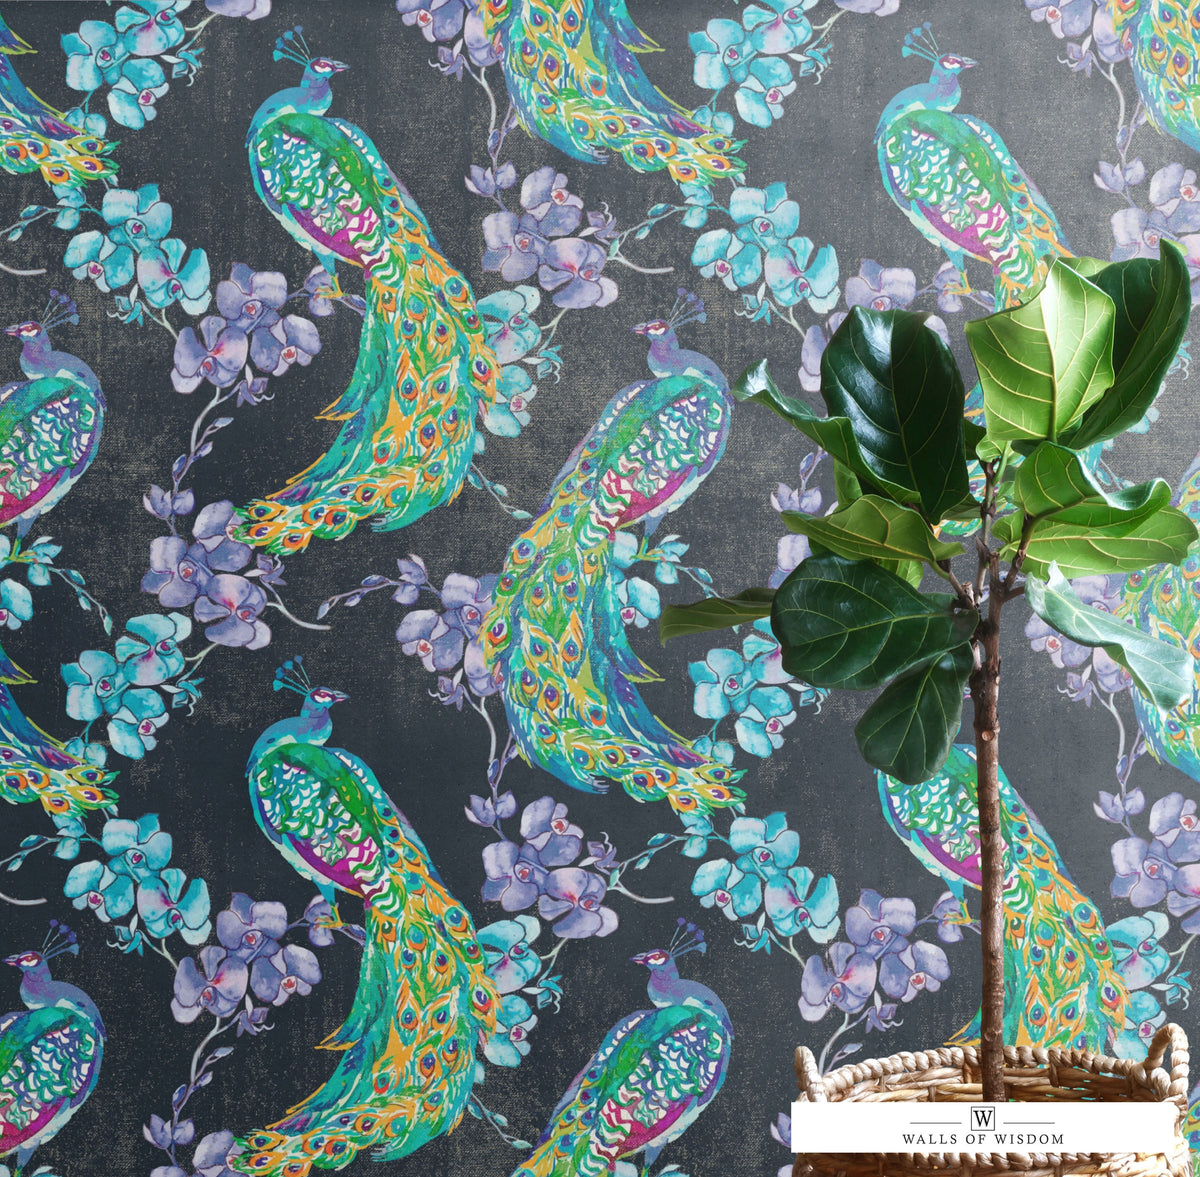 Bright and bold colors of the peel and stick peacock wallpaper in a maximalist decor setting